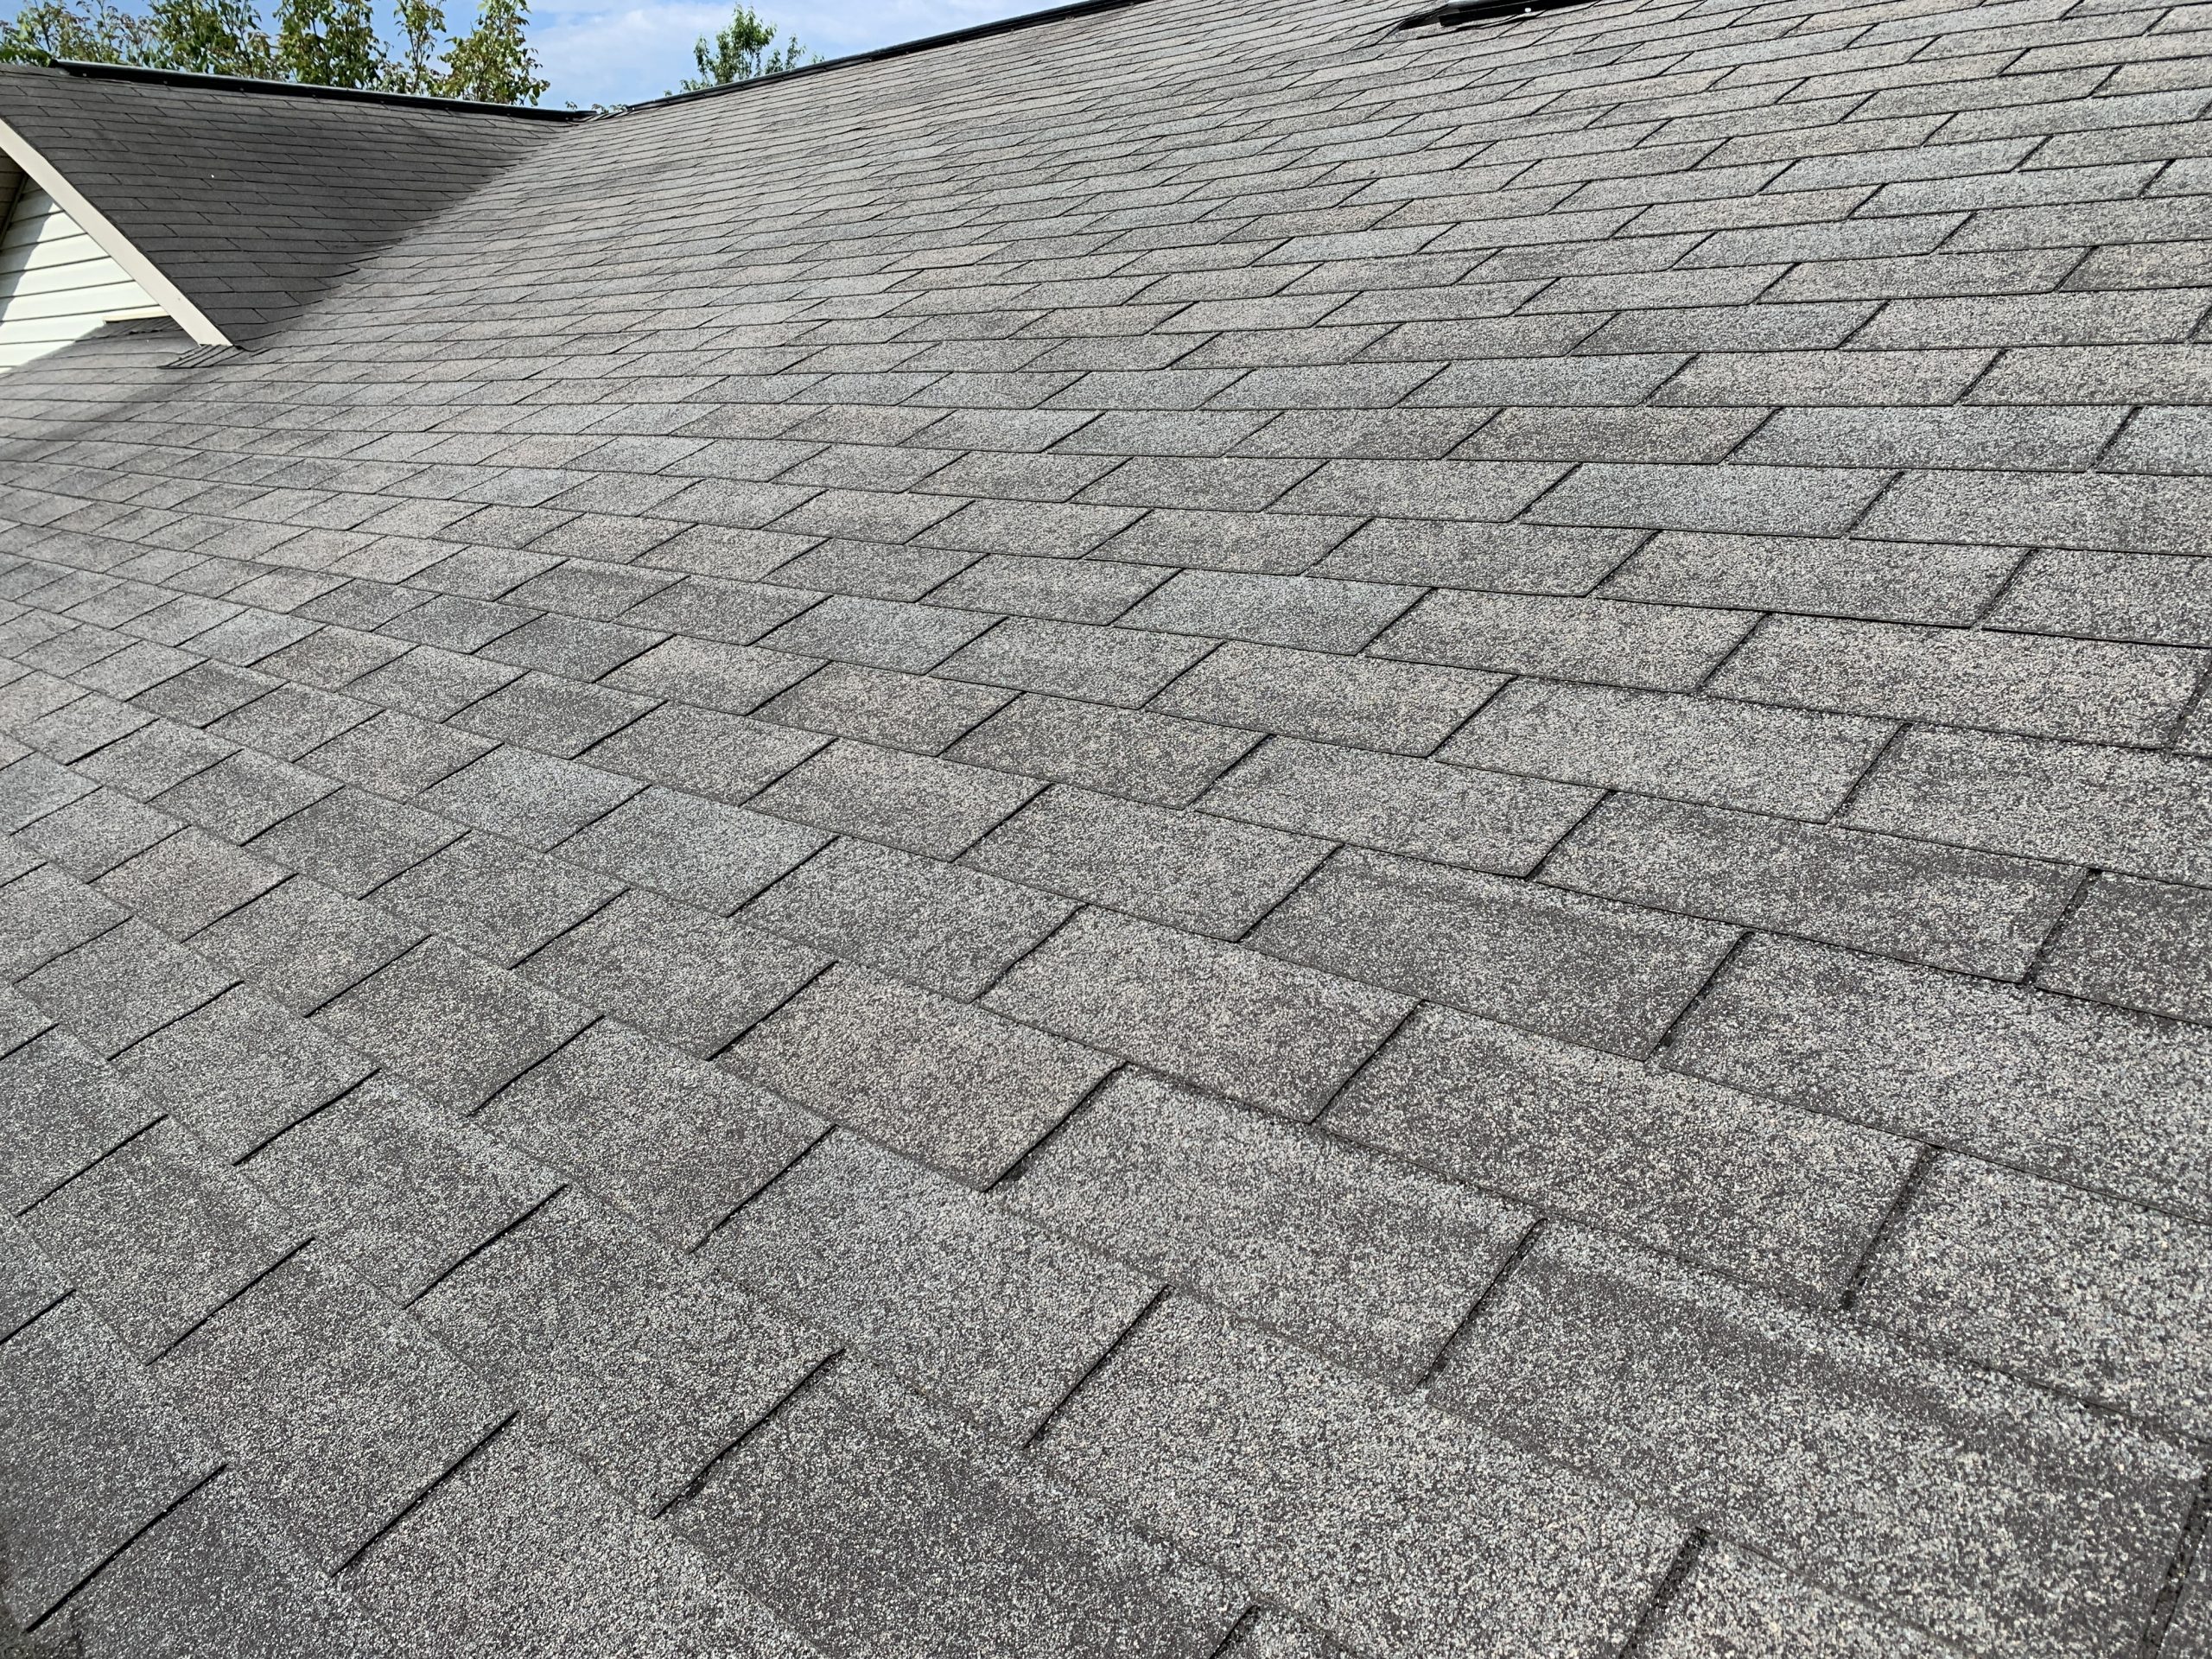 This is a view of a slope of the roof with gray shingles. 